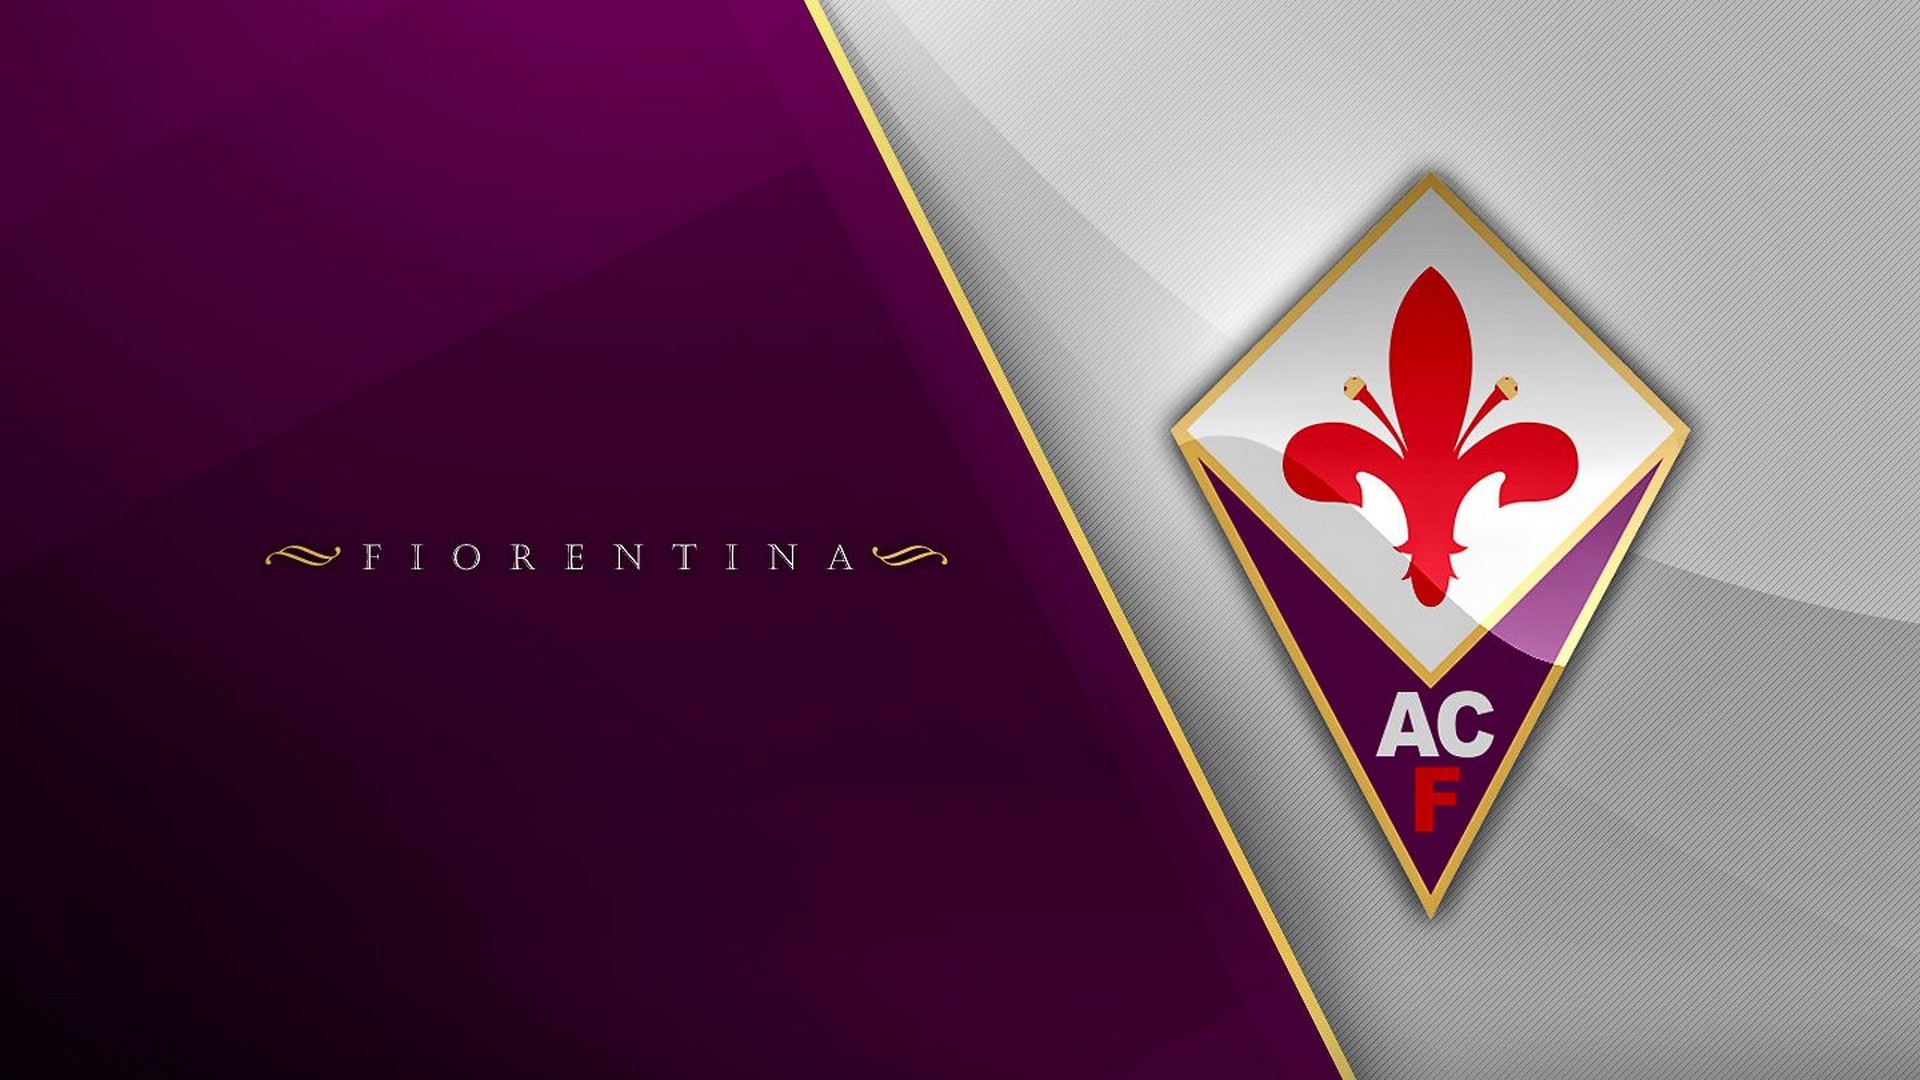 ACF Fiorentina Wallpaper HD with high-resolution 1920x1080 pixel. You can use this wallpaper for your Desktop Computers, Mac Screensavers, Windows Backgrounds, iPhone Wallpapers, Tablet or Android Lock screen and another Mobile device